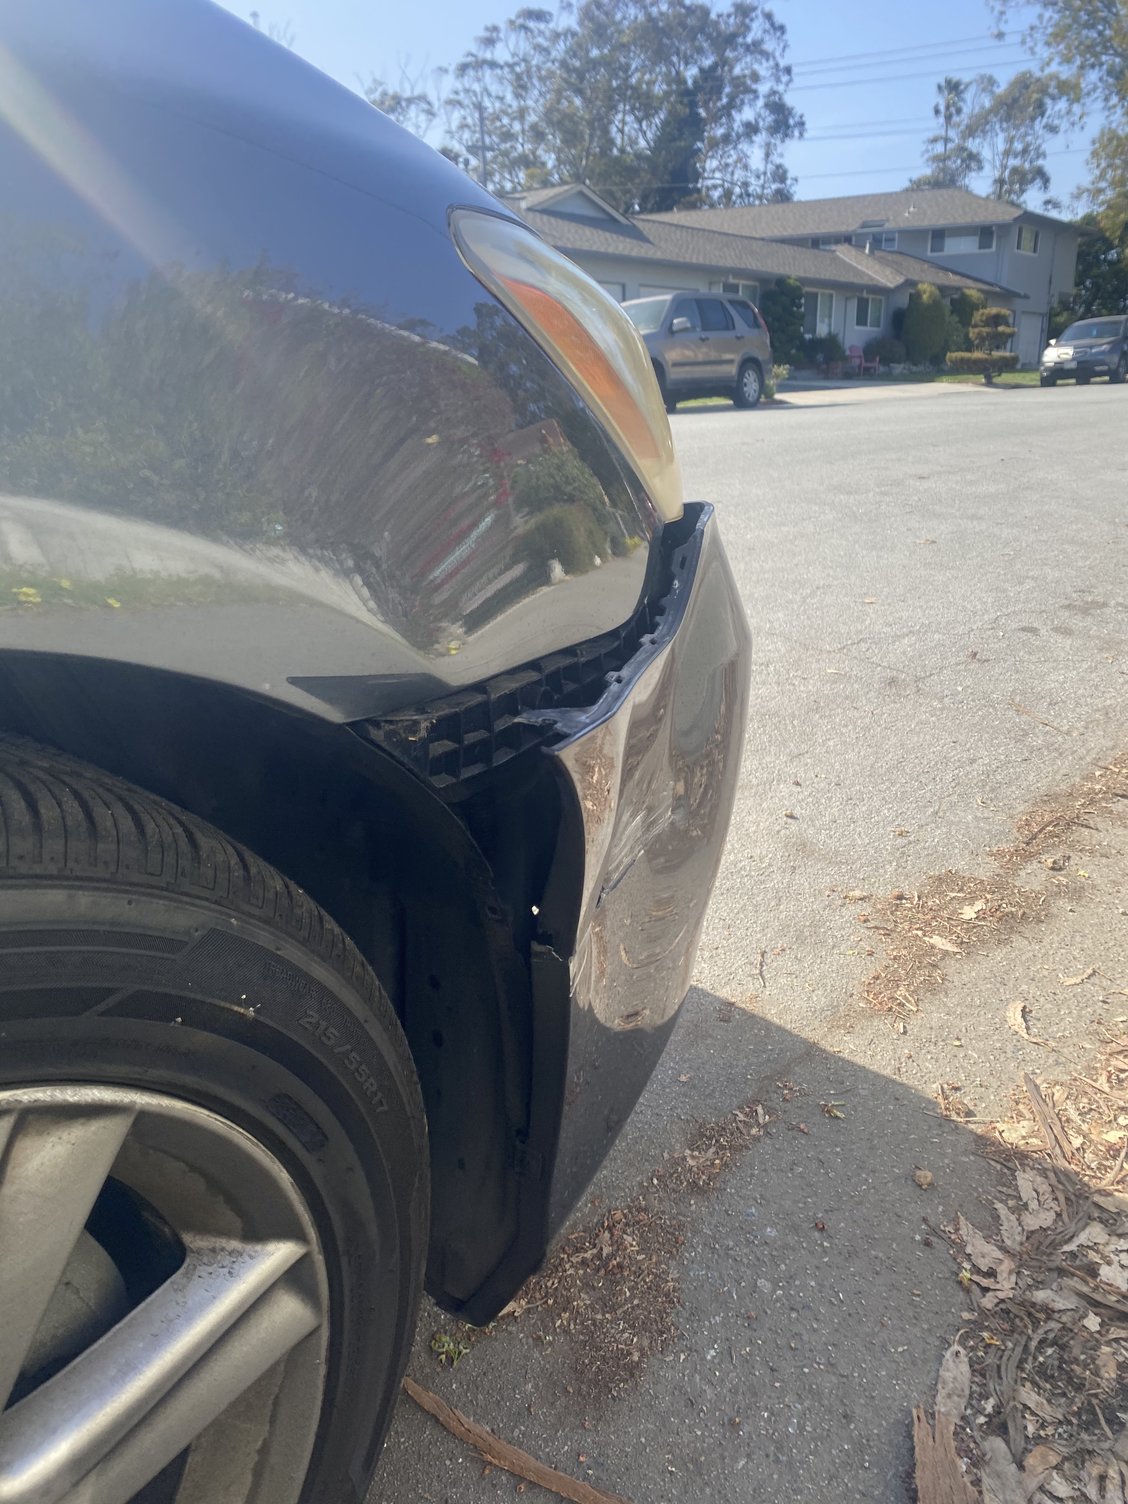 How much to fix/replace bumper?